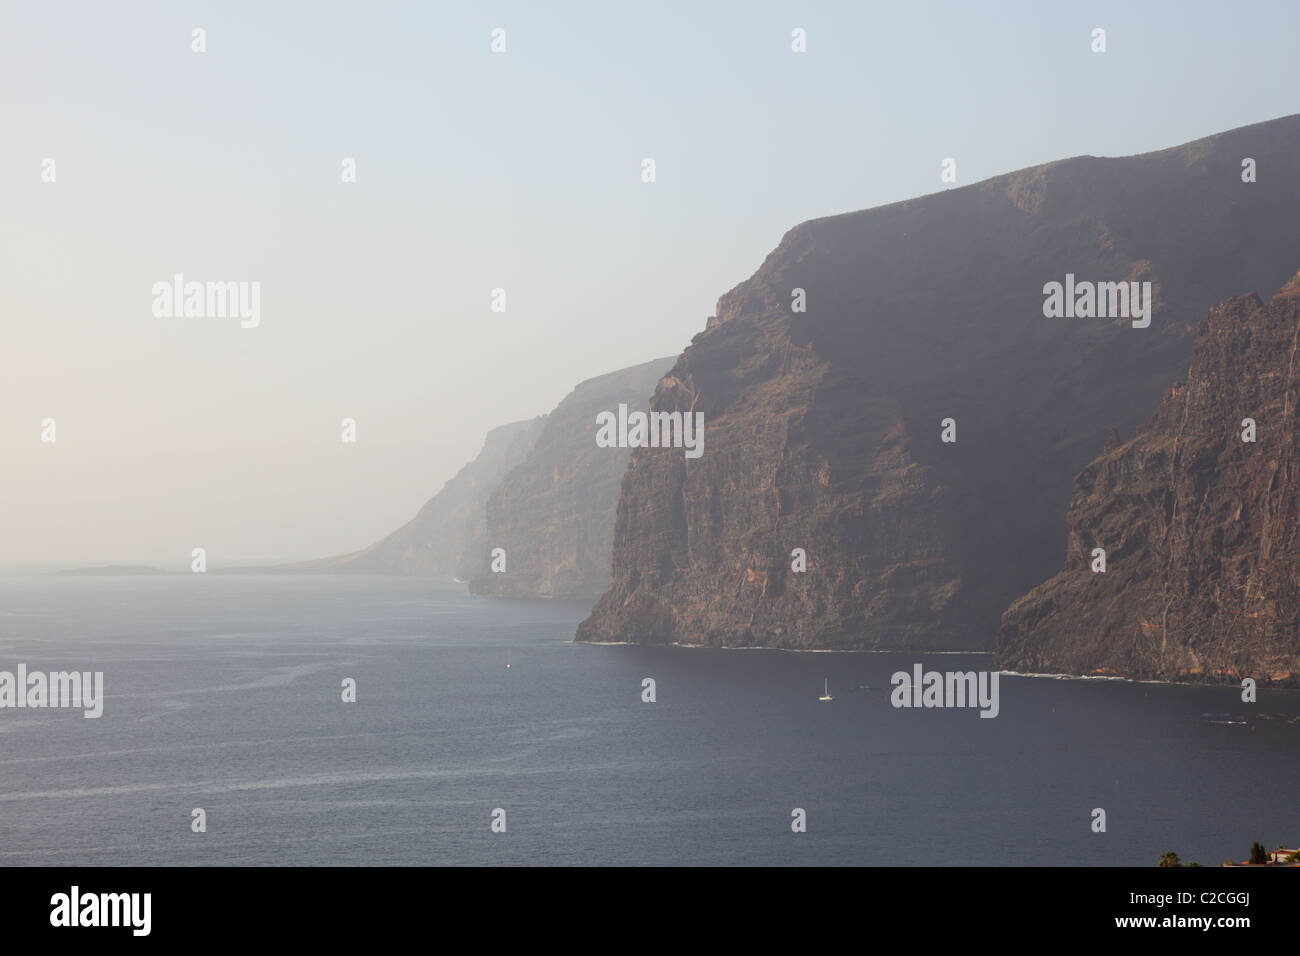 Cliffs of Los Gigantes, Canary Island Tenerife, Spain Stock Photo